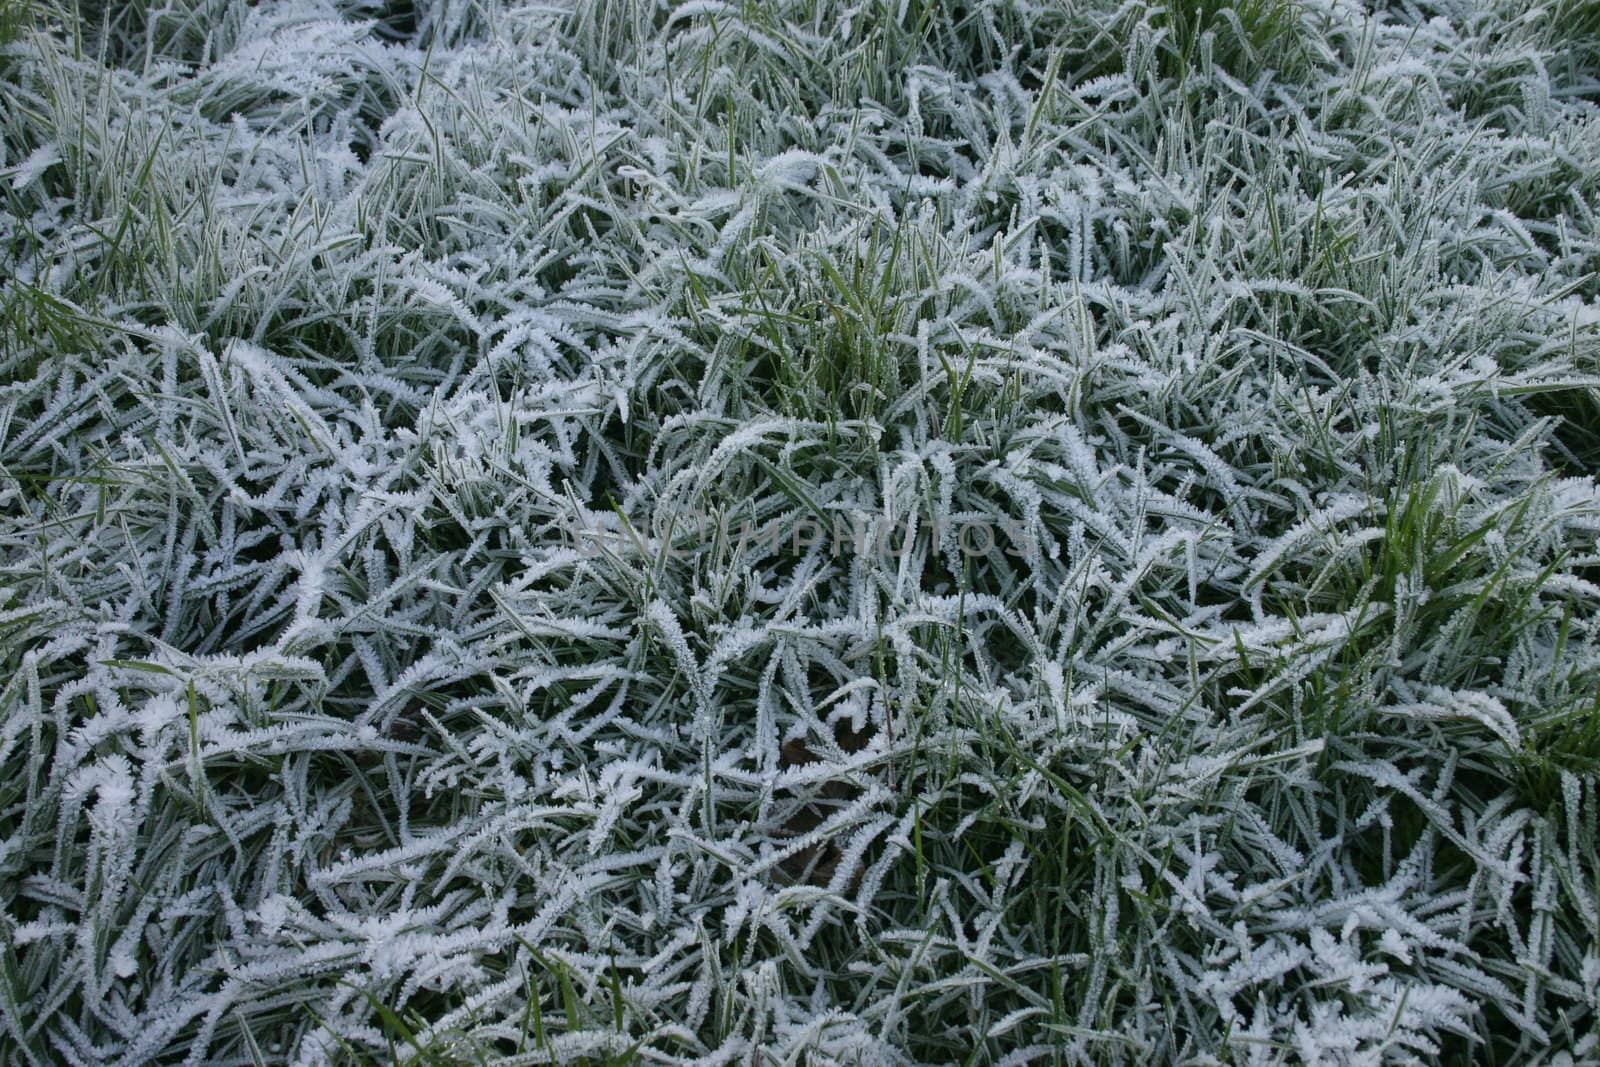 Icy Grass by green308